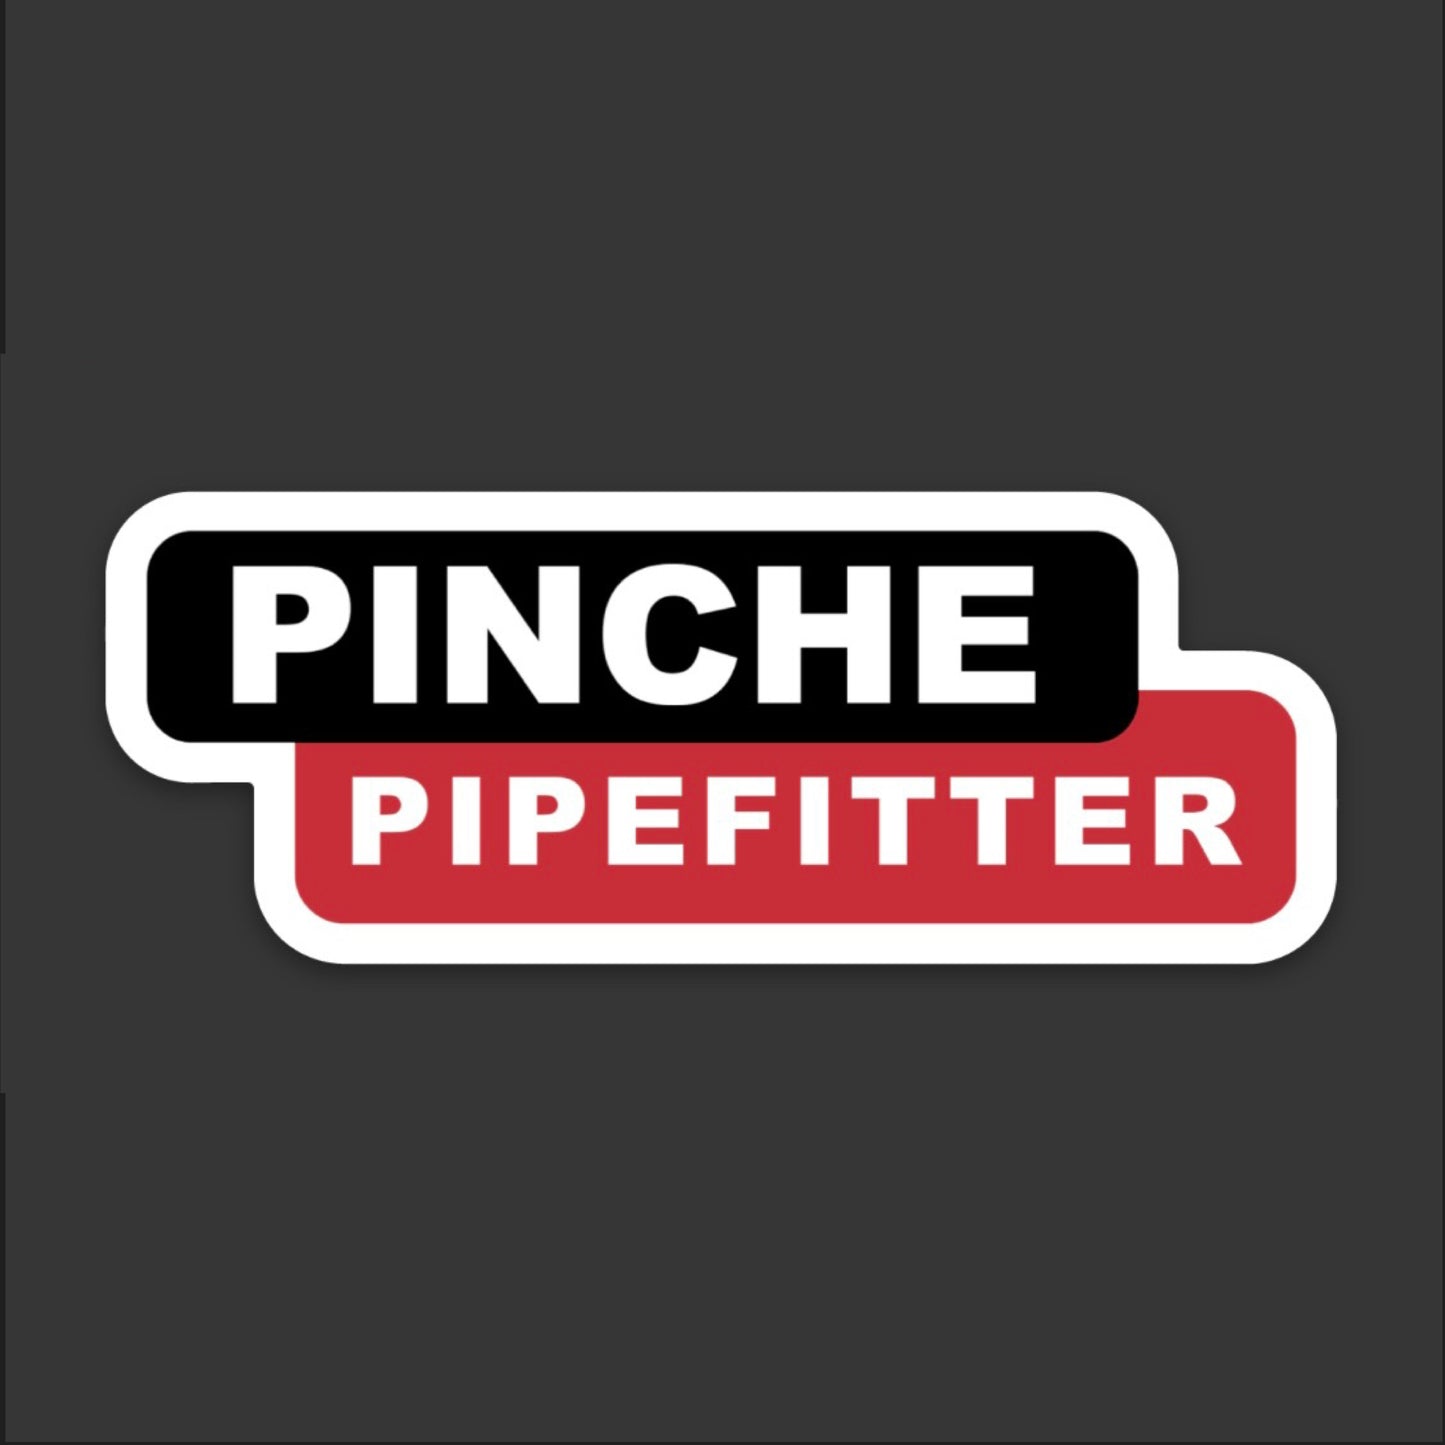 Pinch Pipefitter Stickers (2) Pack